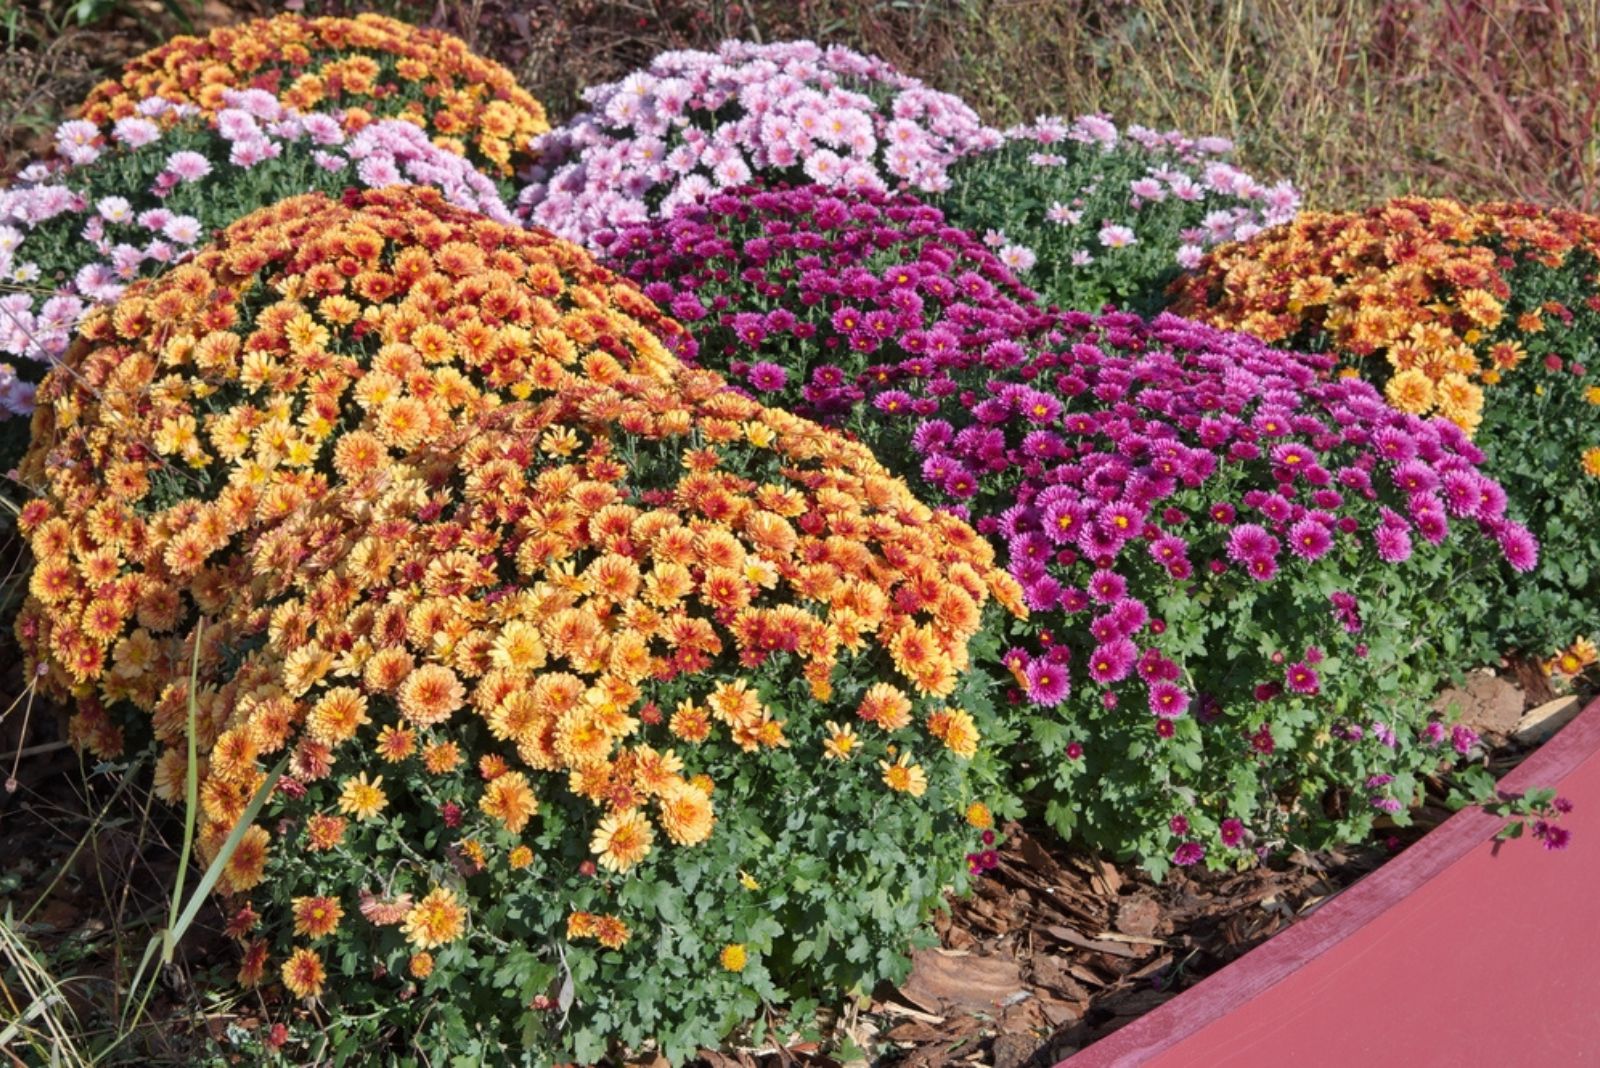 Colorful chrysanthemums bloom on a flower bed in the garden